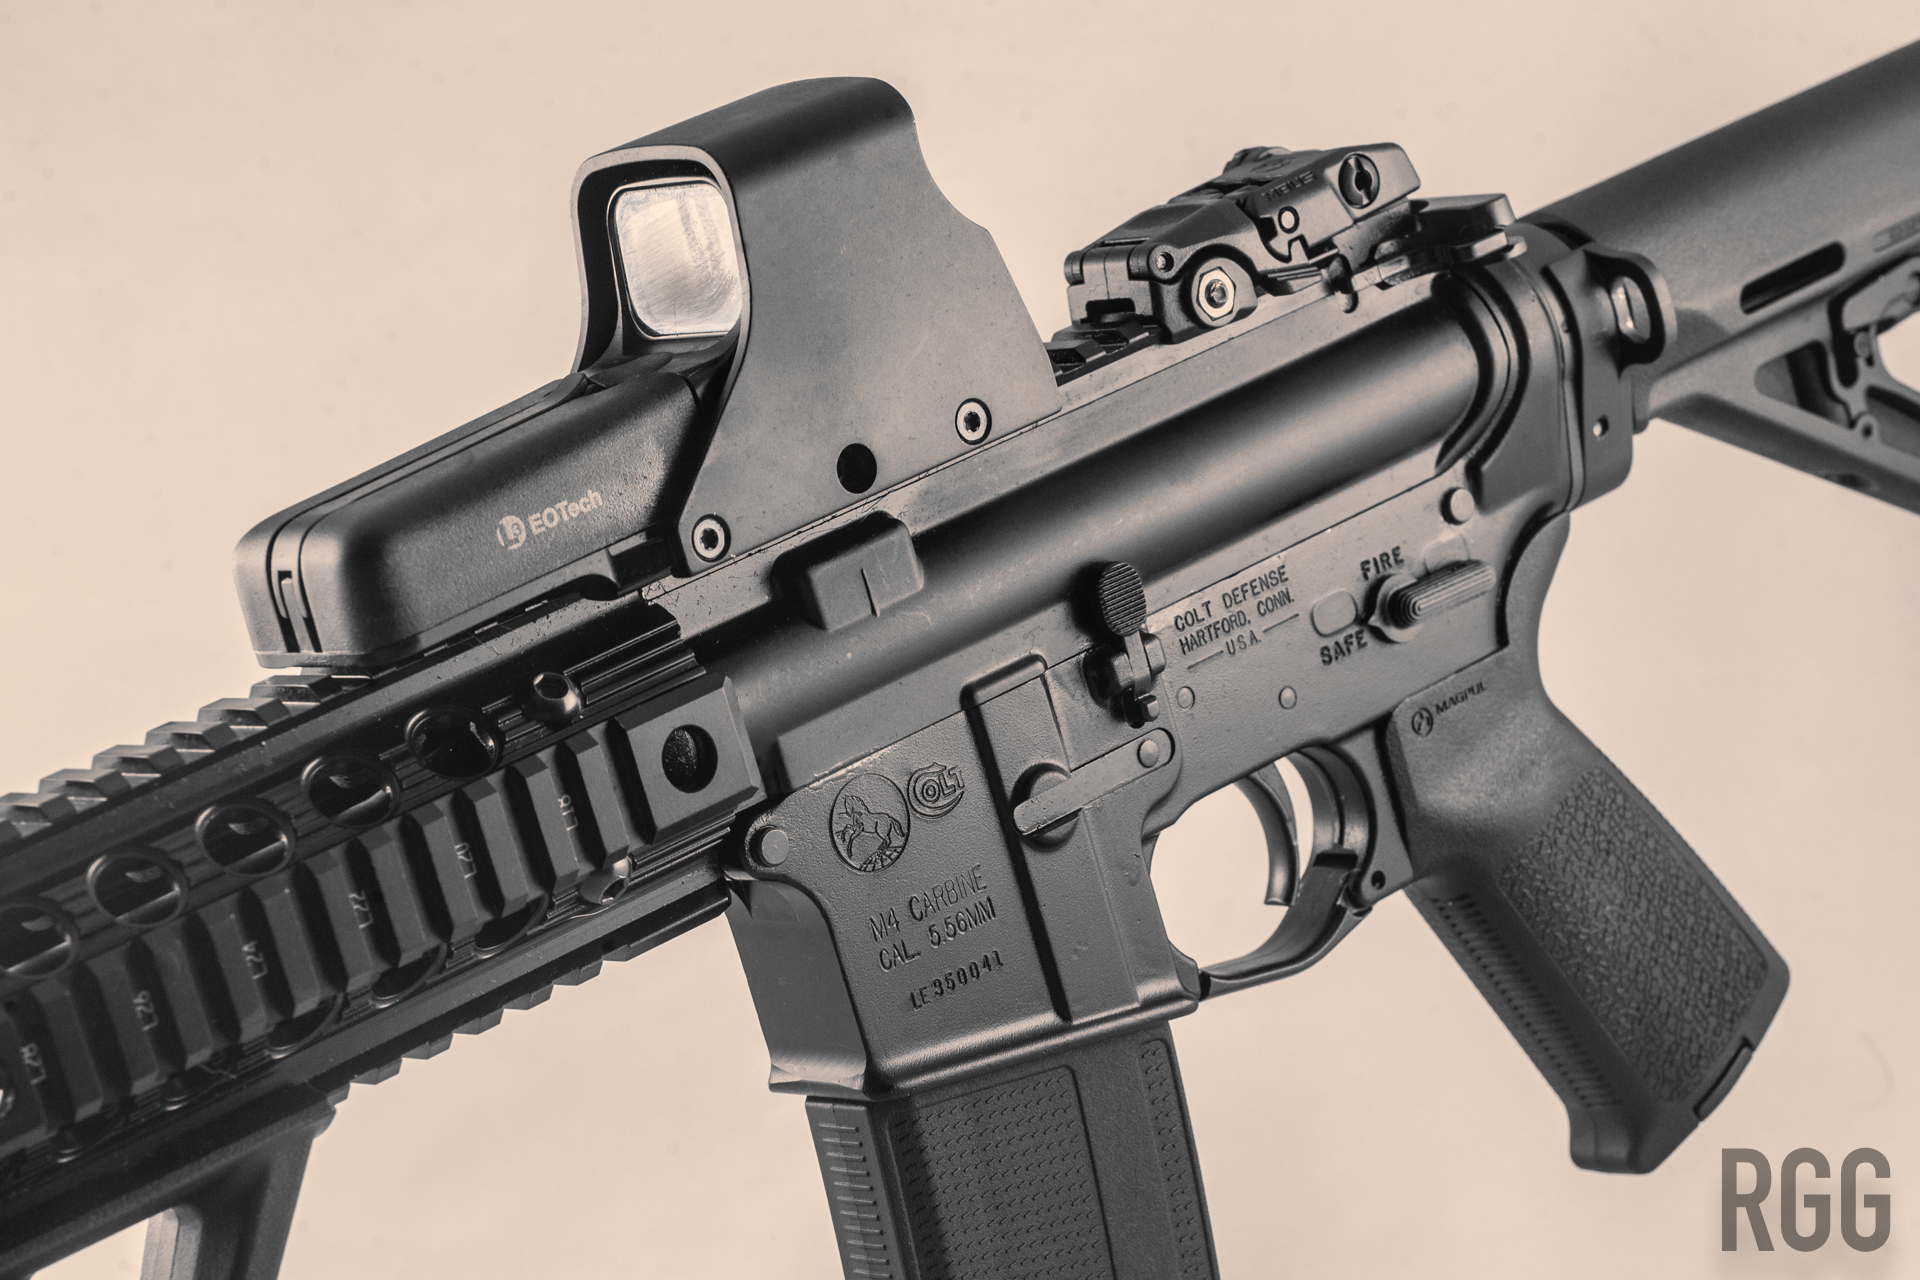 The Colt LE6920 AR - generally regarded as the benchmark for AR-pattern rifles...